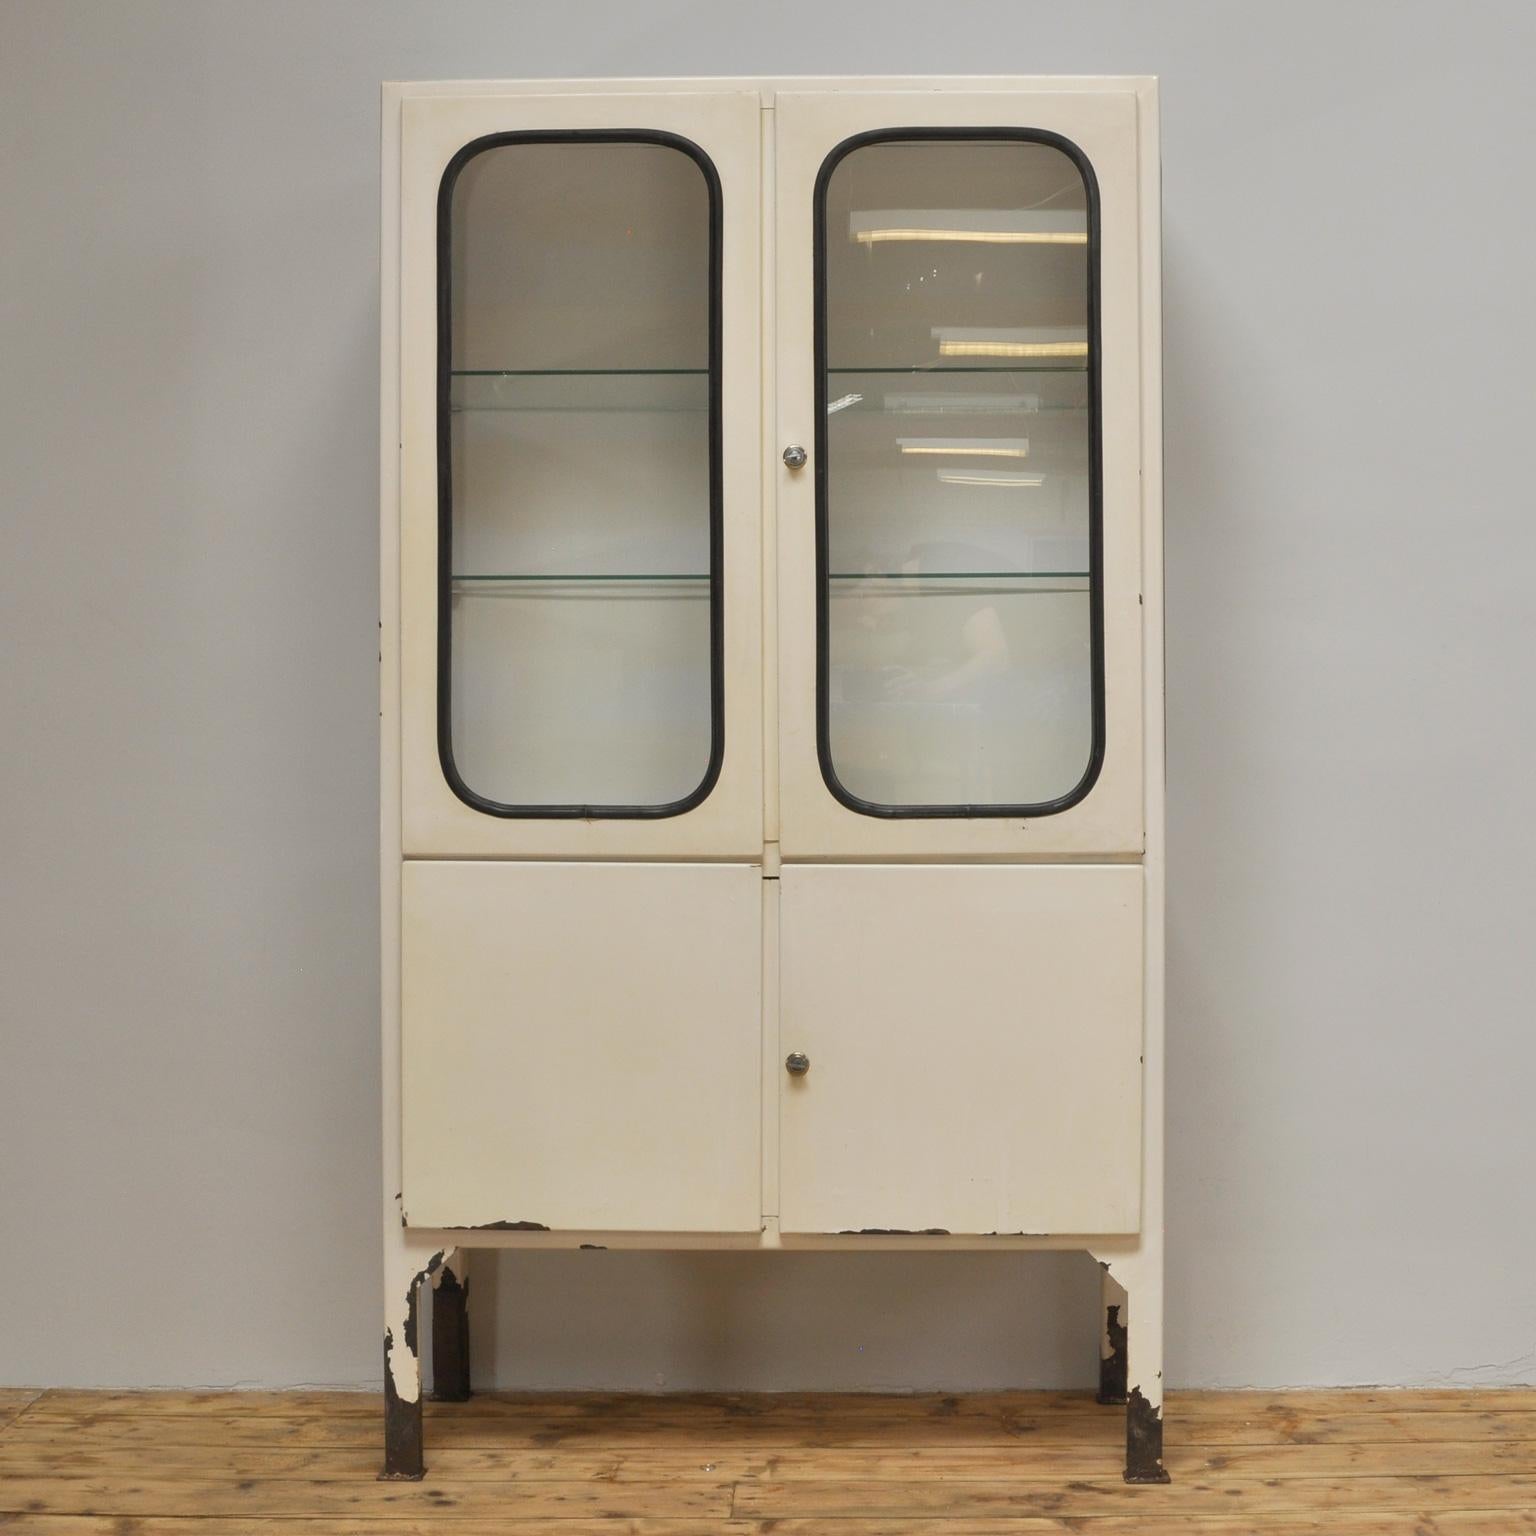 This medicine cabinet was designed in the 1970s and was produced circa 1975 in Hungary. It is made from iron and glass, and the glass is held by a black rubber strip. The cabinet features two adjustable glass shelves and functioning locks.